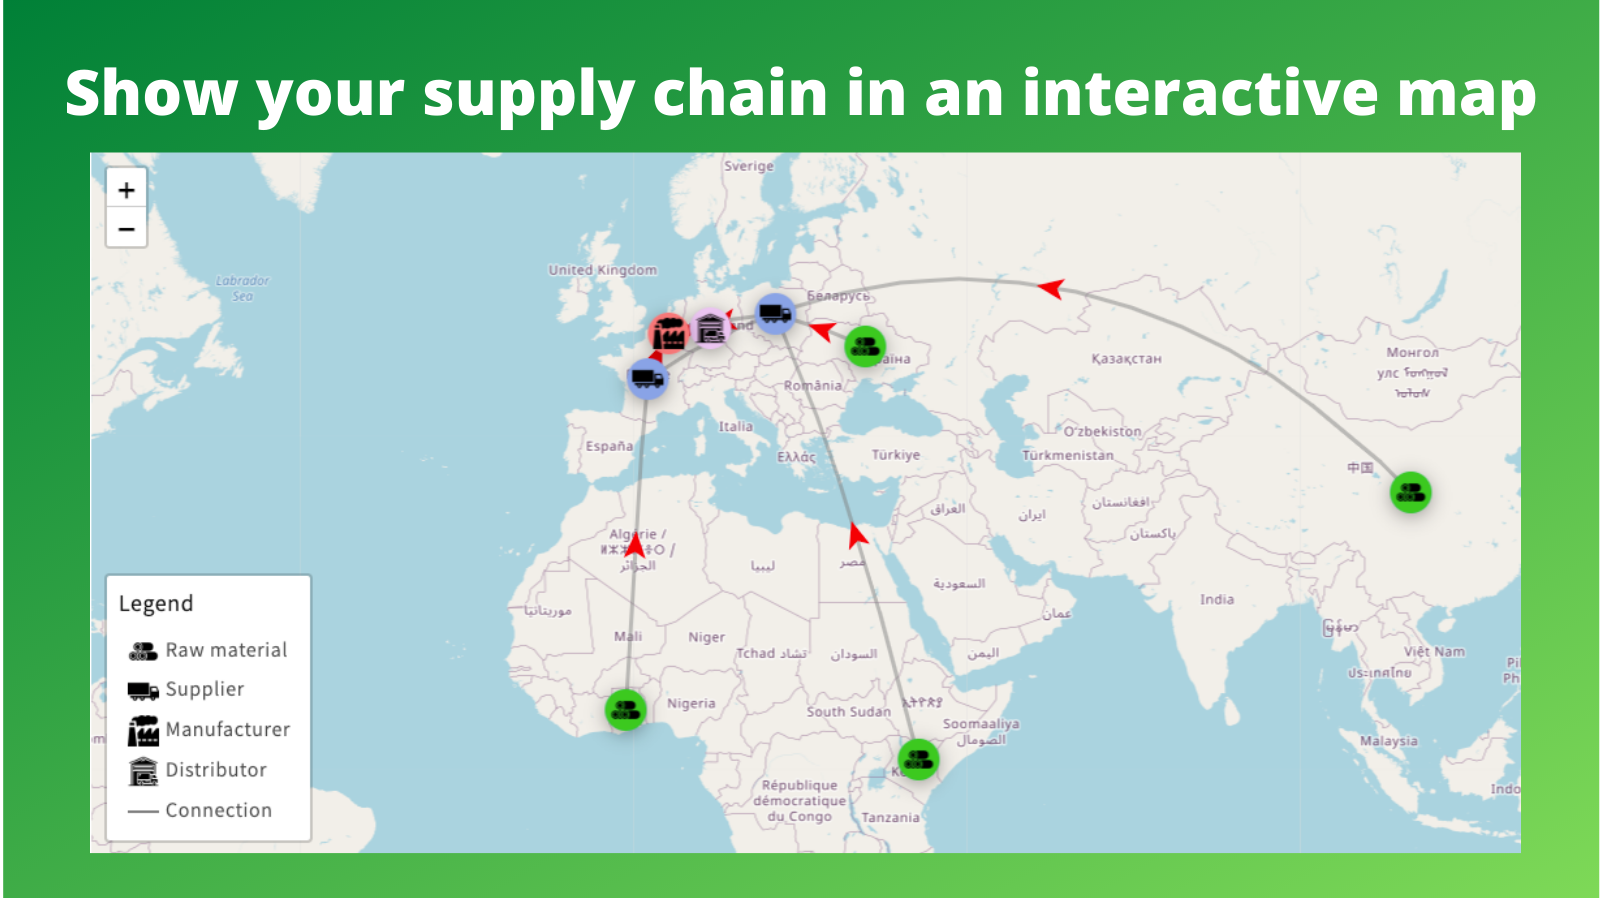 Show your supply chain in an interactive map